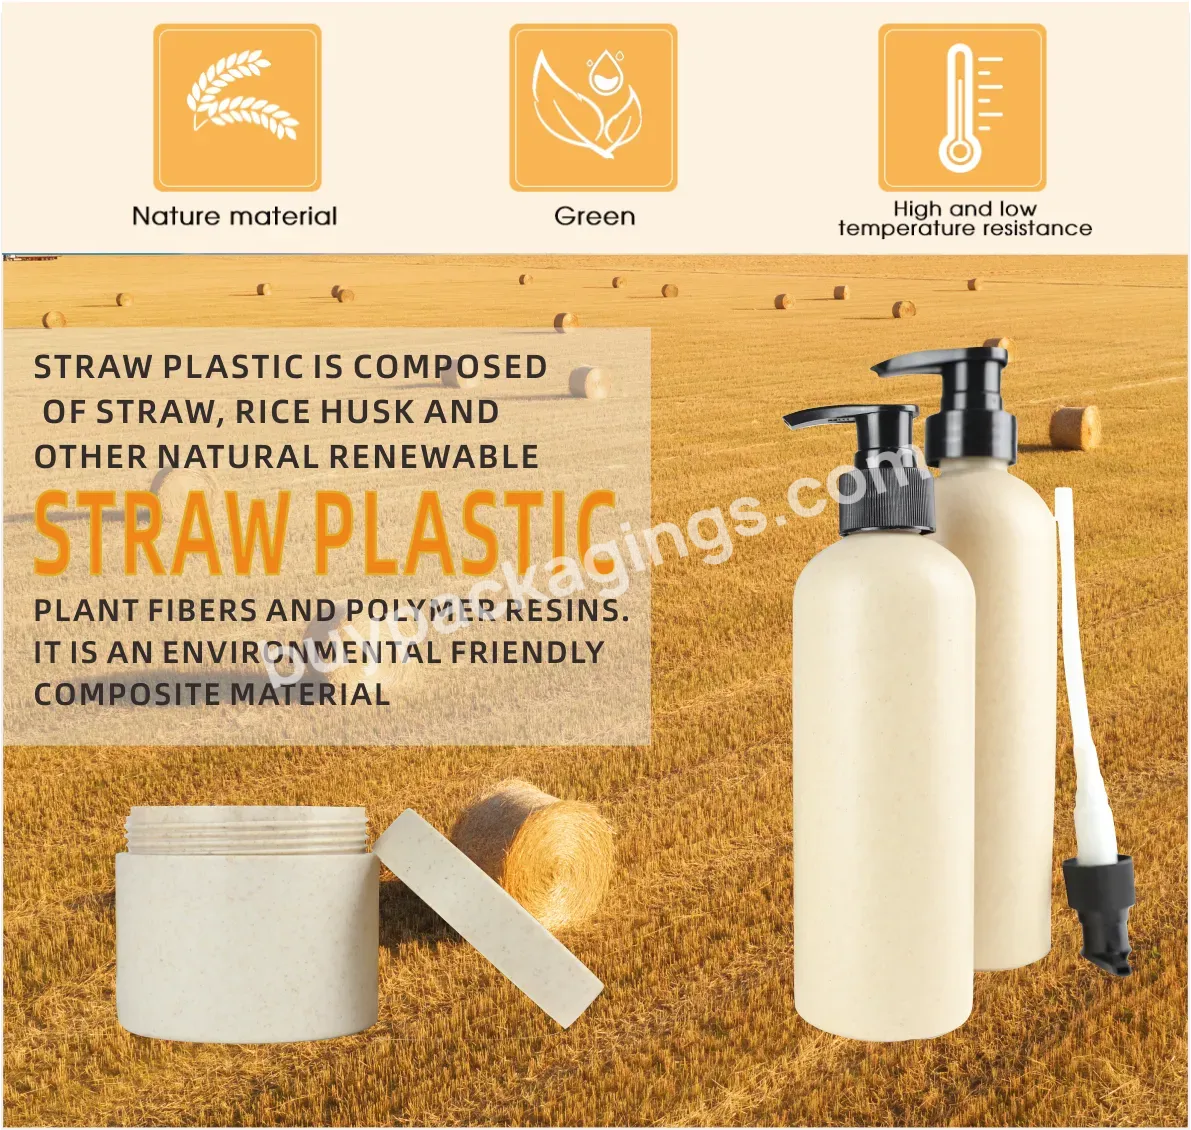 Custom Eco Friendly Luxury Biodegradable Compostable 100% Wheat Straw Products Bottles Jar Cosmetics Packaging Containers - Buy Wheat Straw Bottles,Wheat Straw Biodegradable Cosmetic Jar Containers,Cosmetics Packaging Containers.